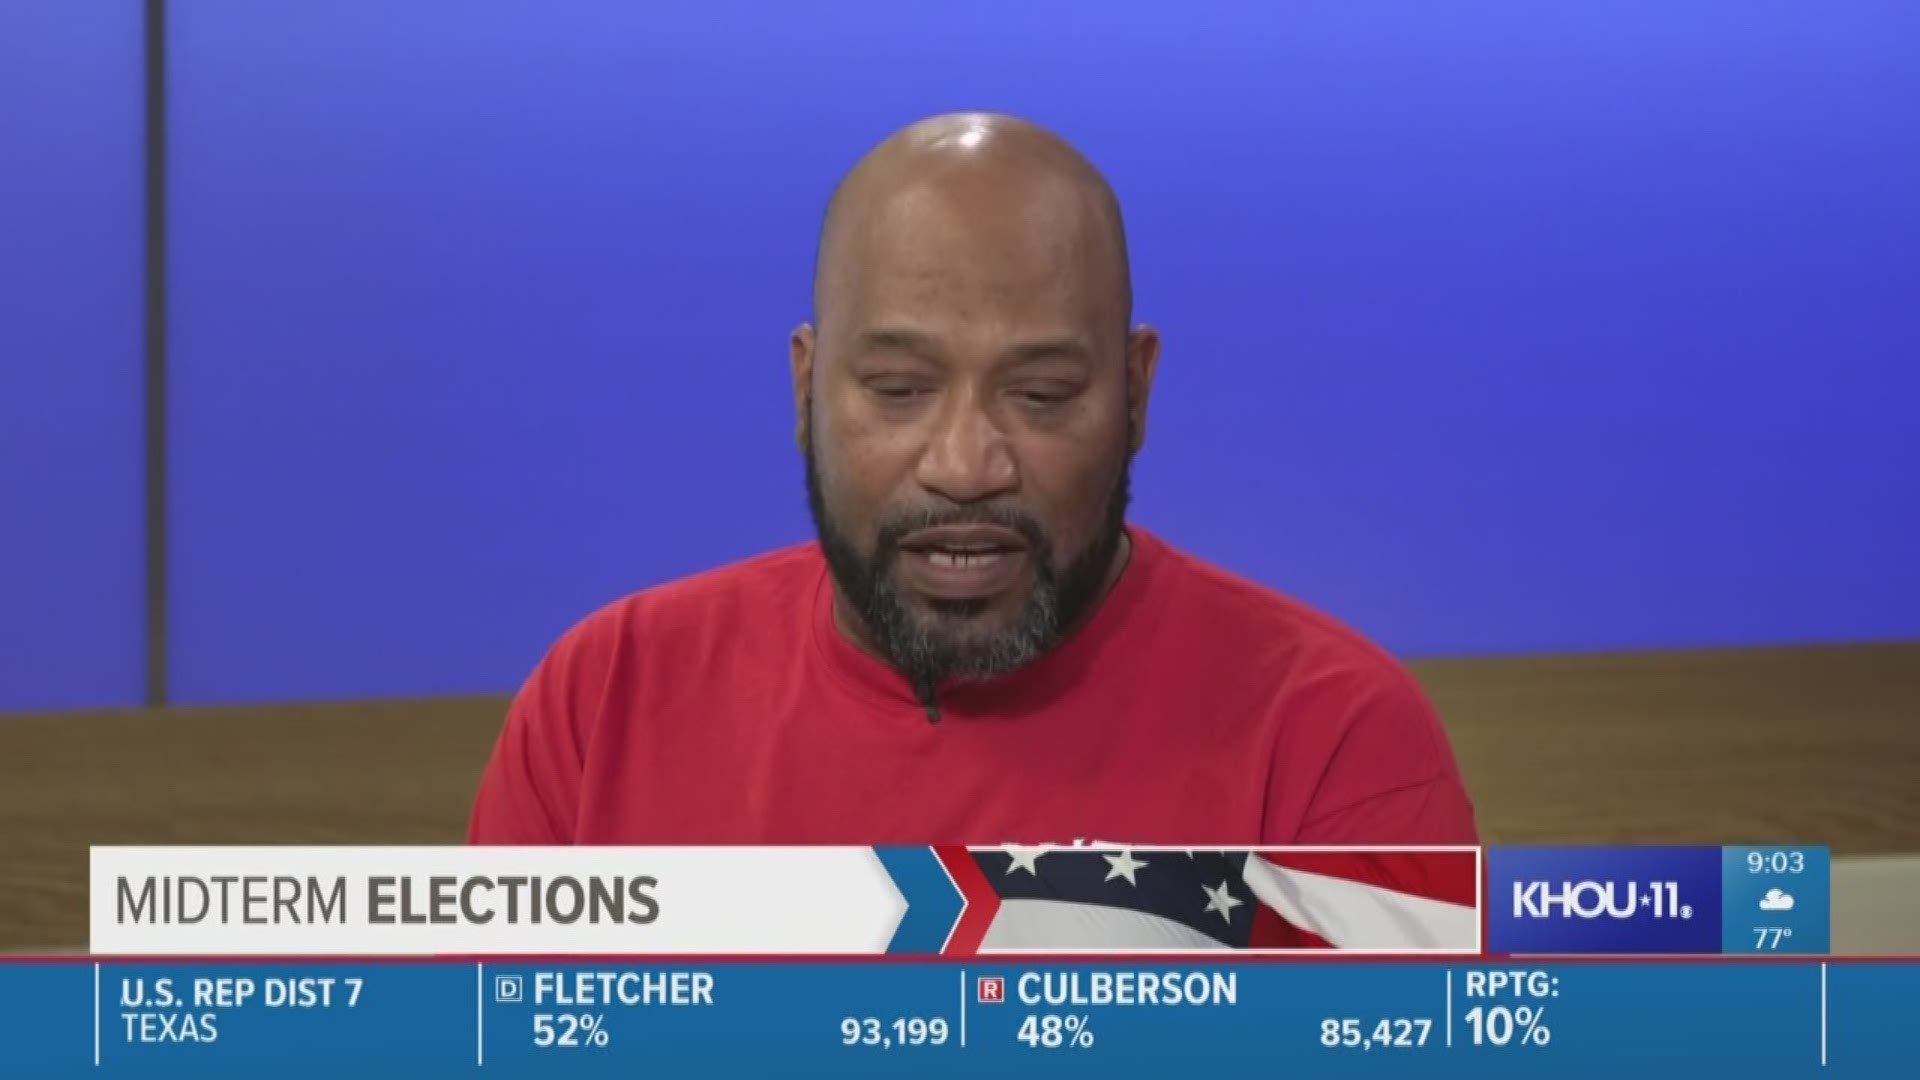 Rapper Bun B on how the presidential election influenced Texas voters.